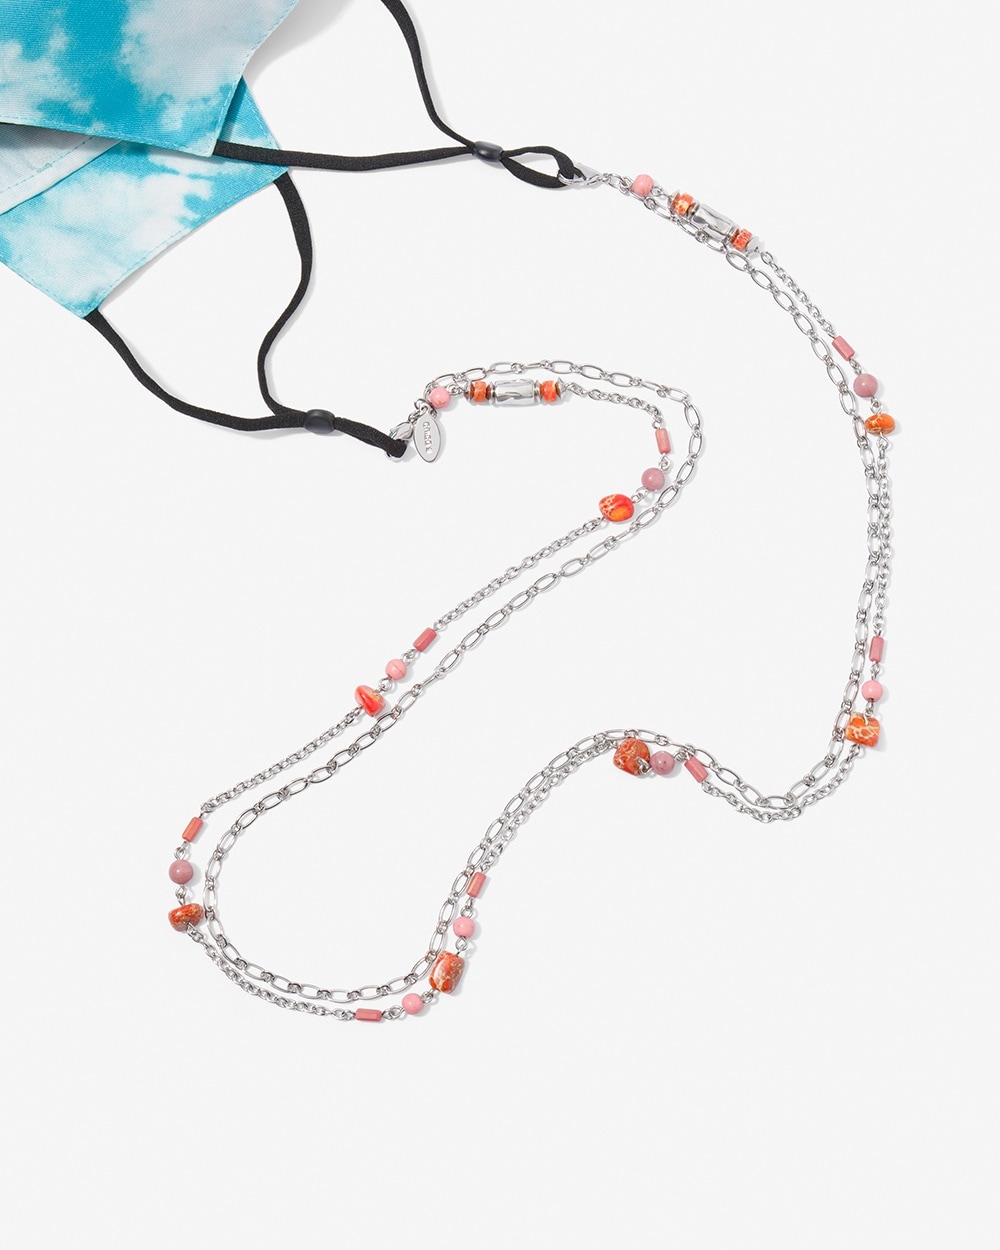 Bead-and-Chain Convertible Mask Necklace